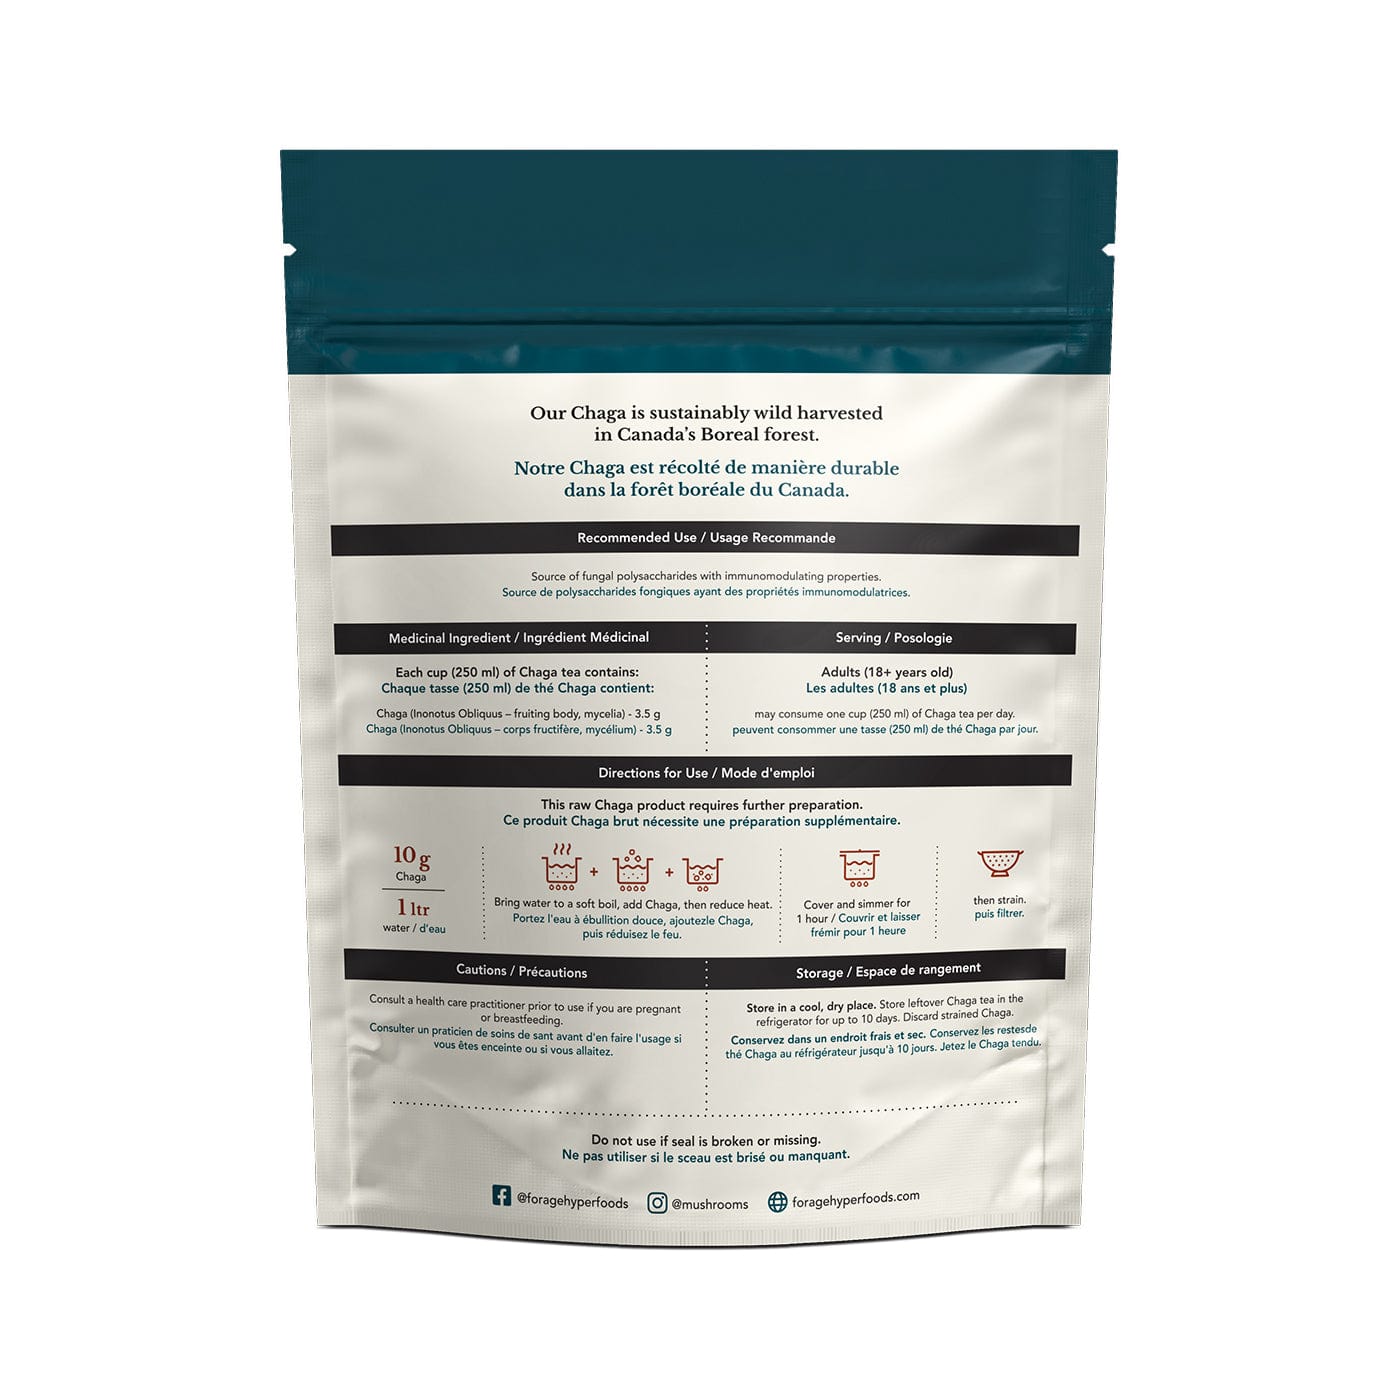 The back of the bag of Canadian Chaga Powder by Forage Hyperfoods. It lists instructions on how to cook, serving sizes, recommended use and a short blurb about how it was harvested.